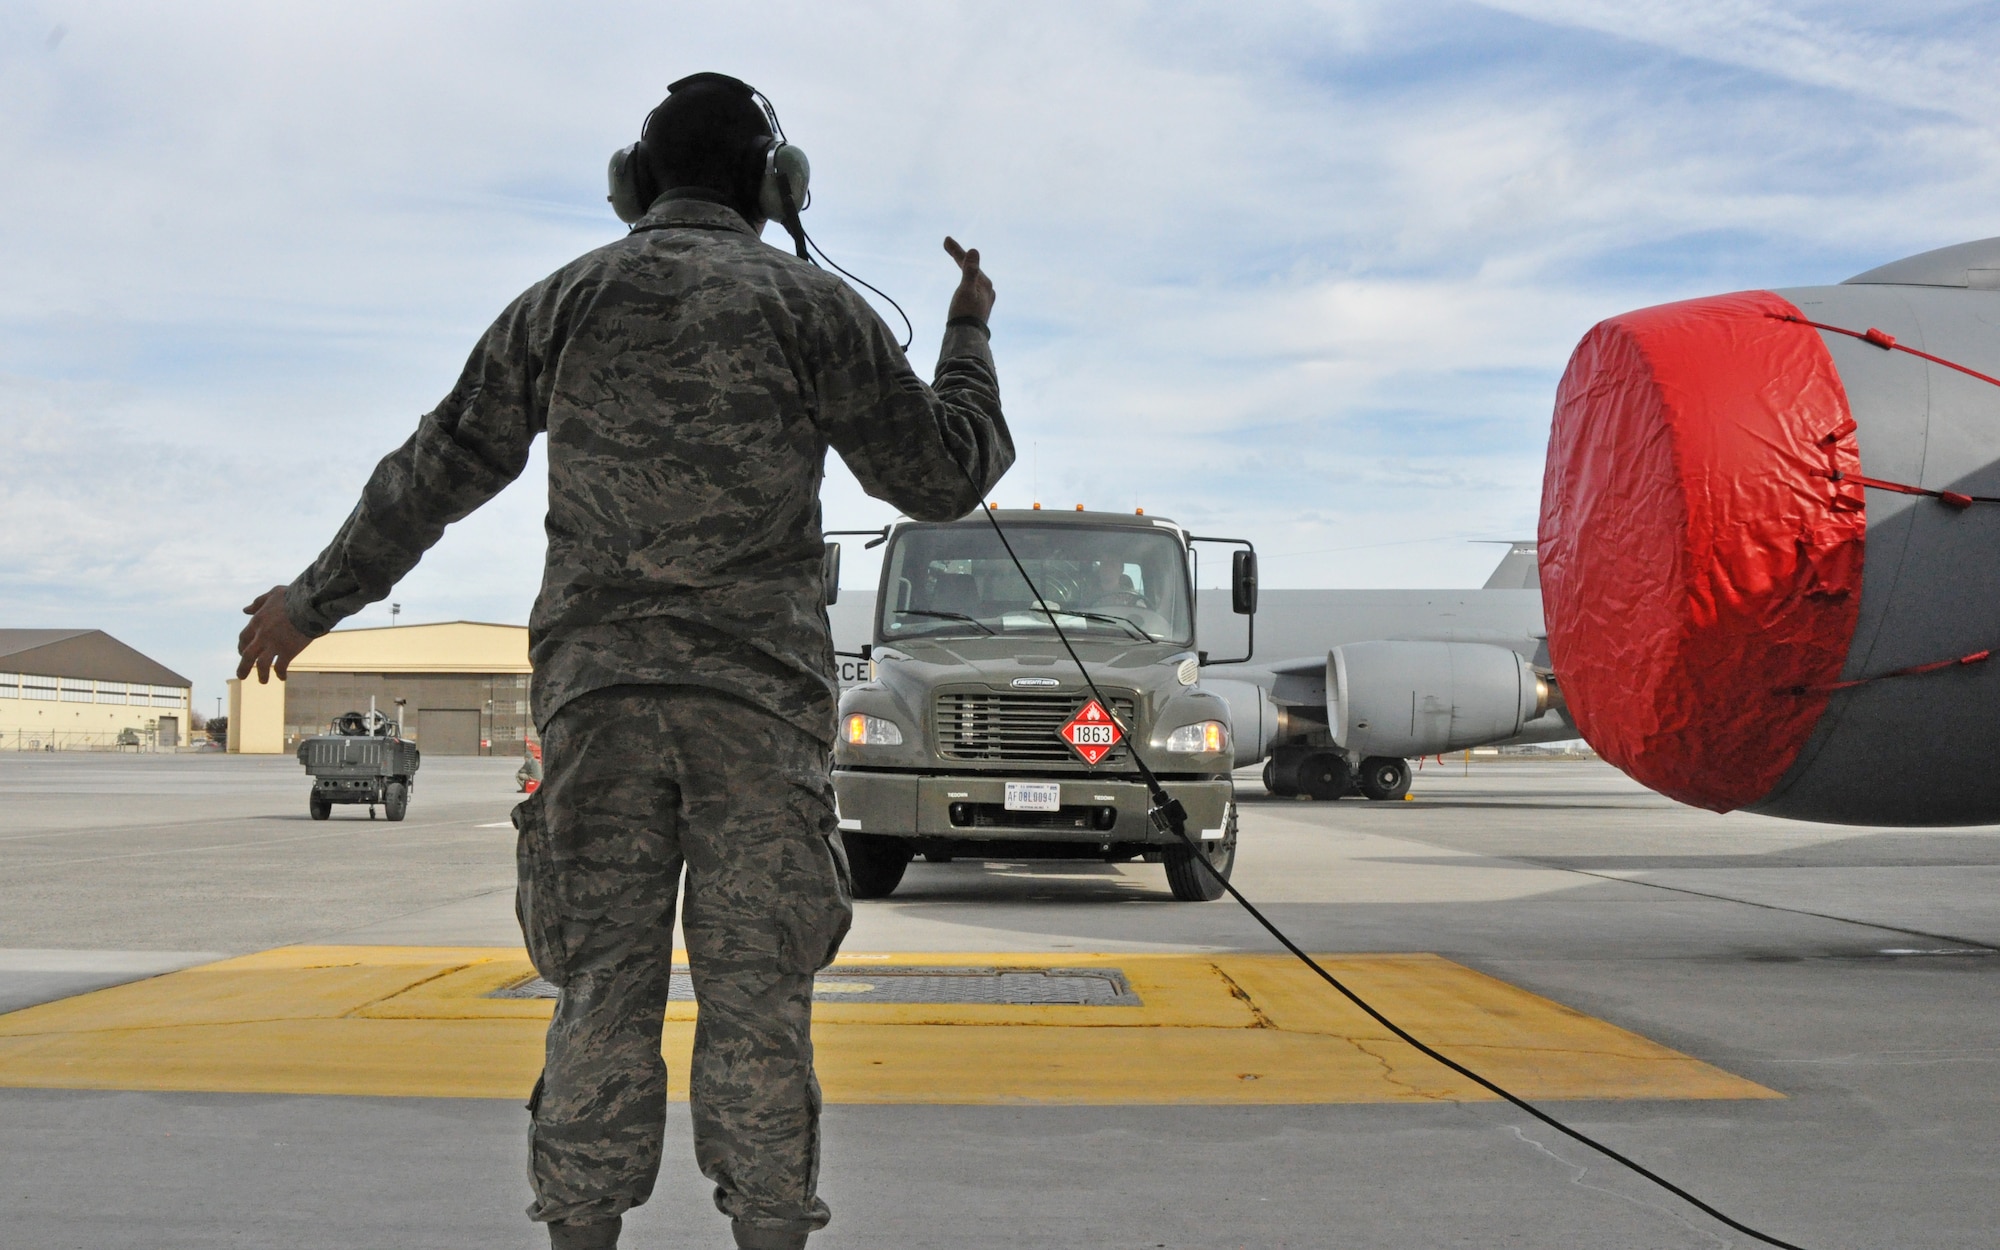 Senior Airman Roberto Tellez-Barrios, a 92nd Maintenance Squadron KC-135 Stratotanker crew chief, marshals an R-12 hydrant servicing vehicle to his aircraft in preparation for refueling operations Feb. 18, 2015, at Fairchild Air Force Base, Wash. Both 92nd MXS and 92nd Logistics Readiness Squadron fuels distribution element Airmen work together to fill the KC-135 with up to 30,000 gallons of jet fuel to be used to extend the reach of U.S. military aircraft from all branches of service as they perform training and operational missions in support of homeland defense, transport and other military operations. (U.S. Air Force photo/Capt. David Liapis)